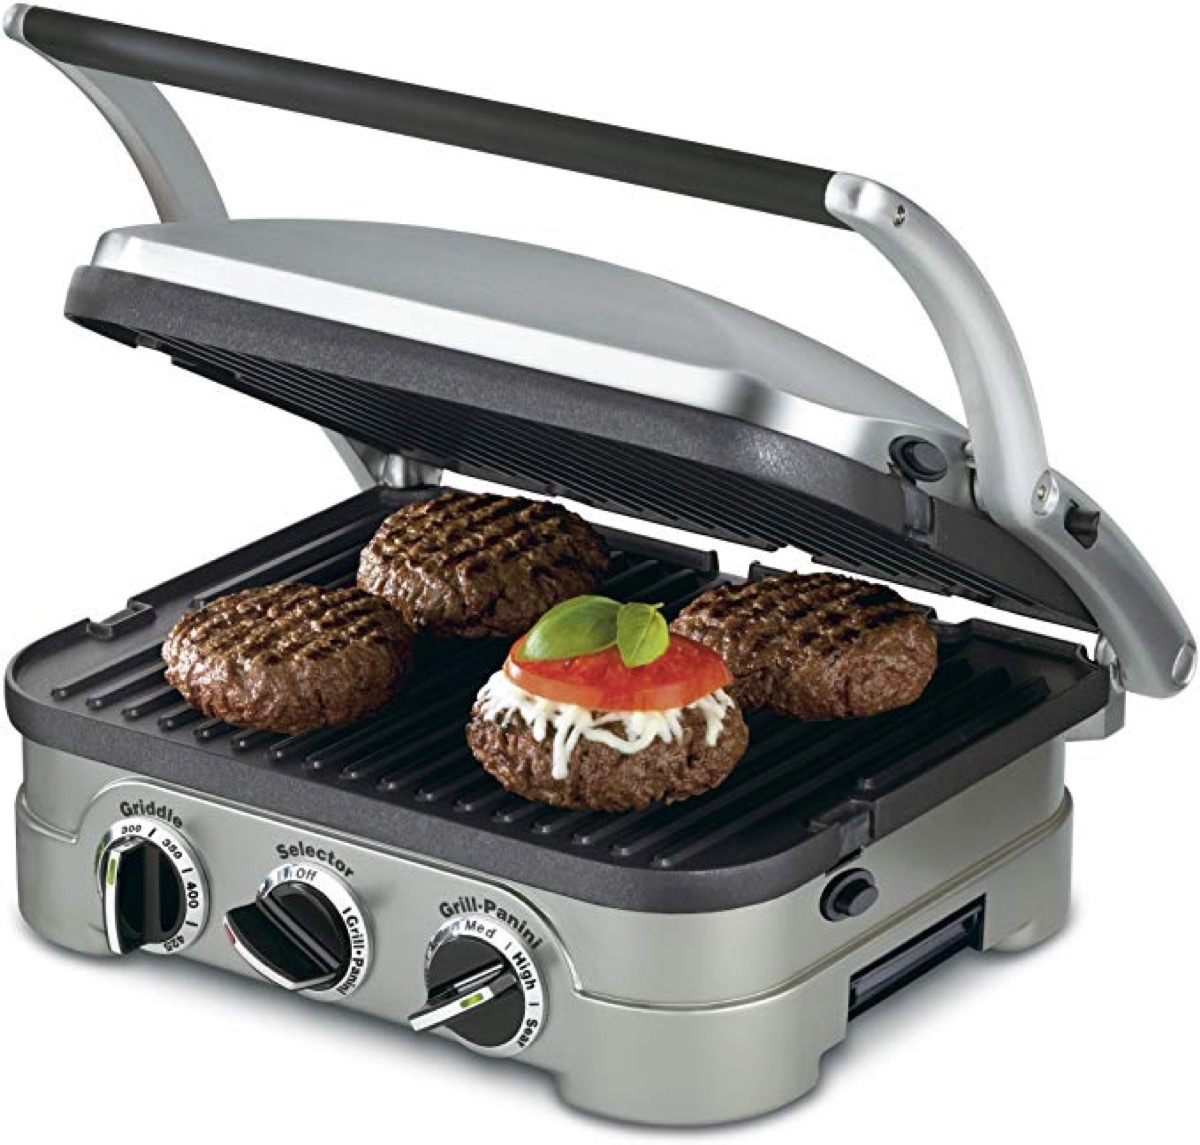 Griddle cooking burgers